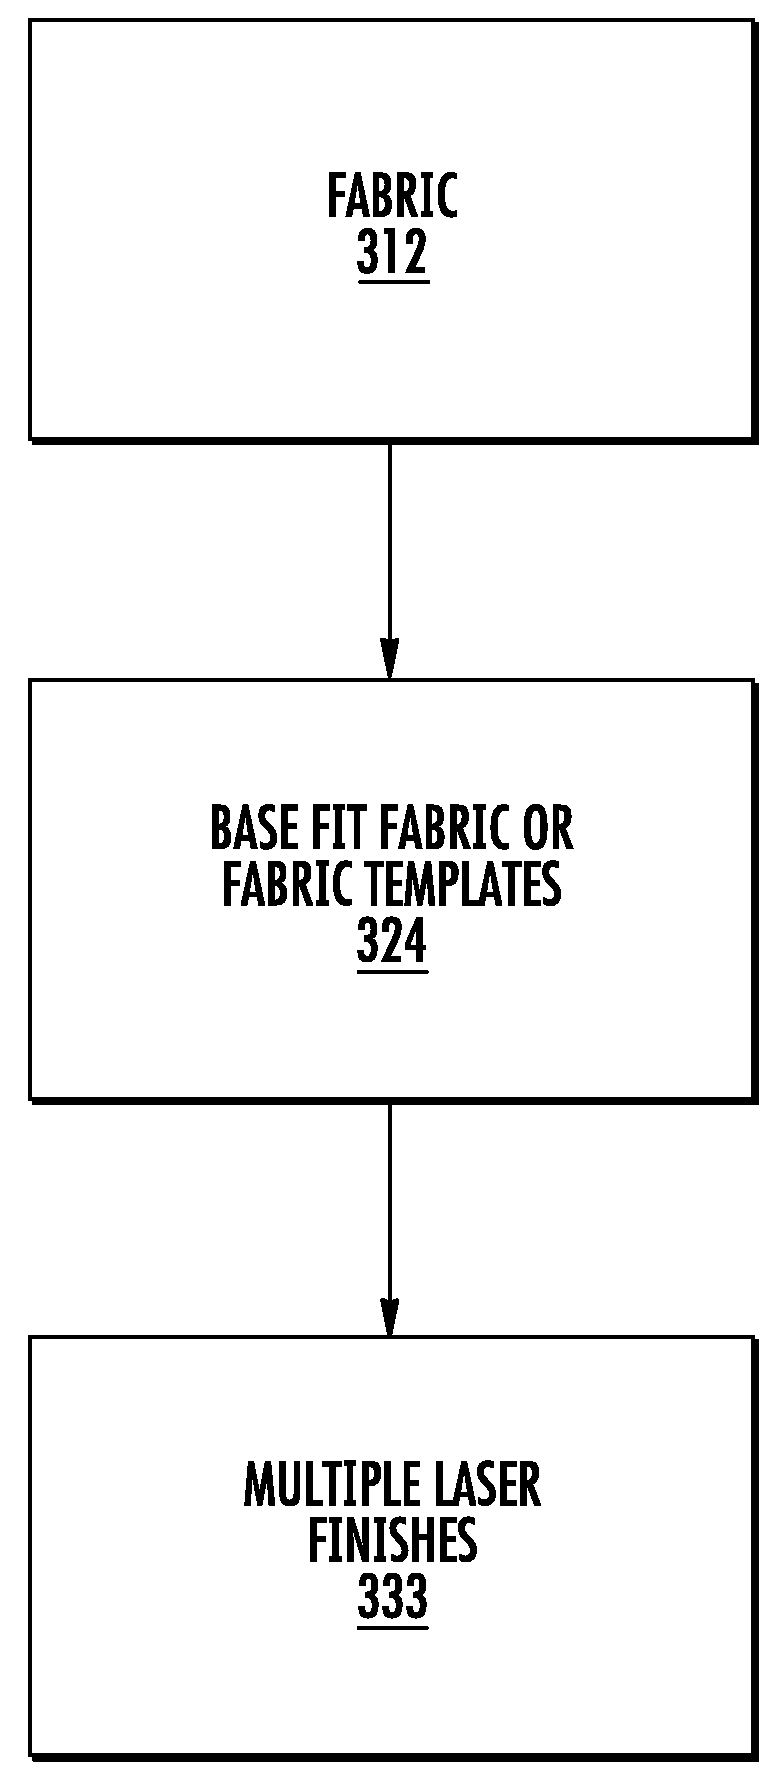 Multiple Apparel Products by Using Fabric Templates and Laser Finishing